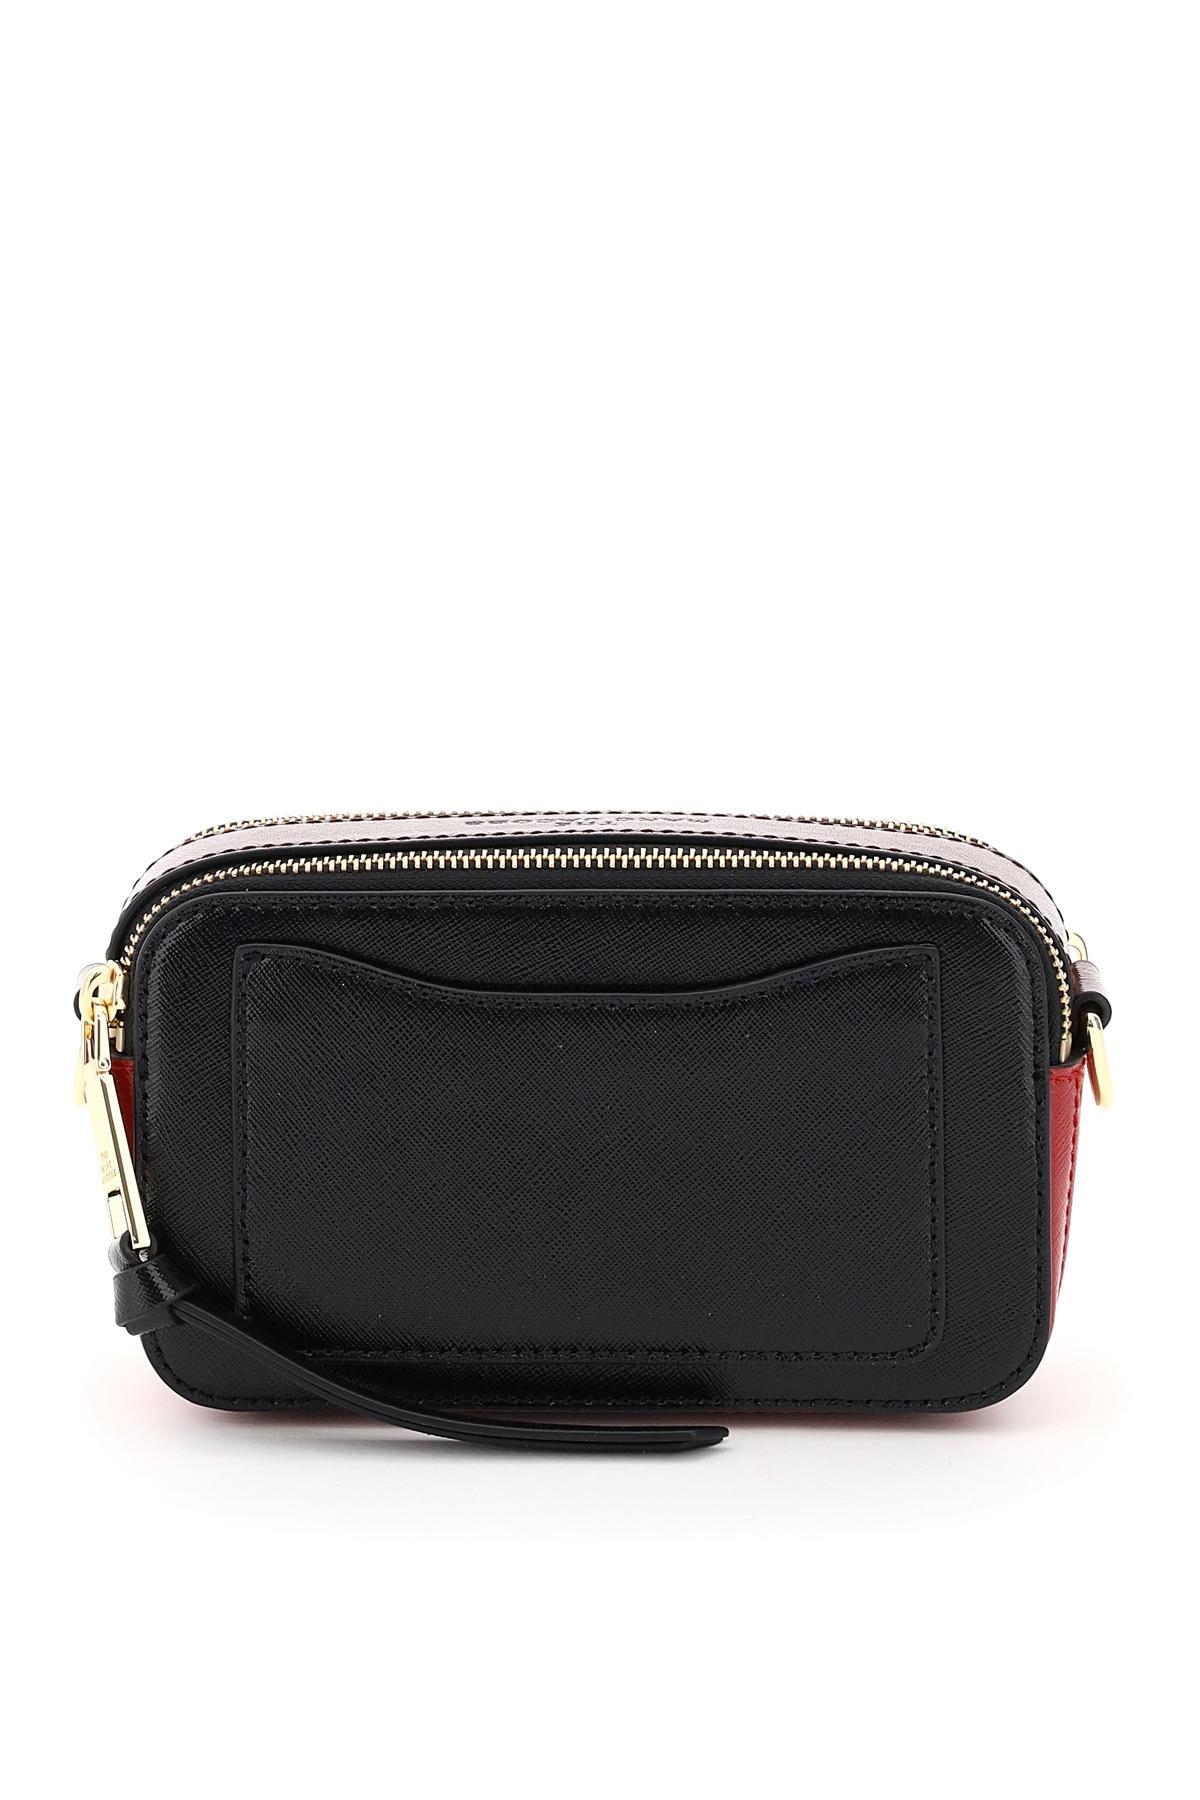 Marc jacobs the snapshot small camera bag – AUMI 4